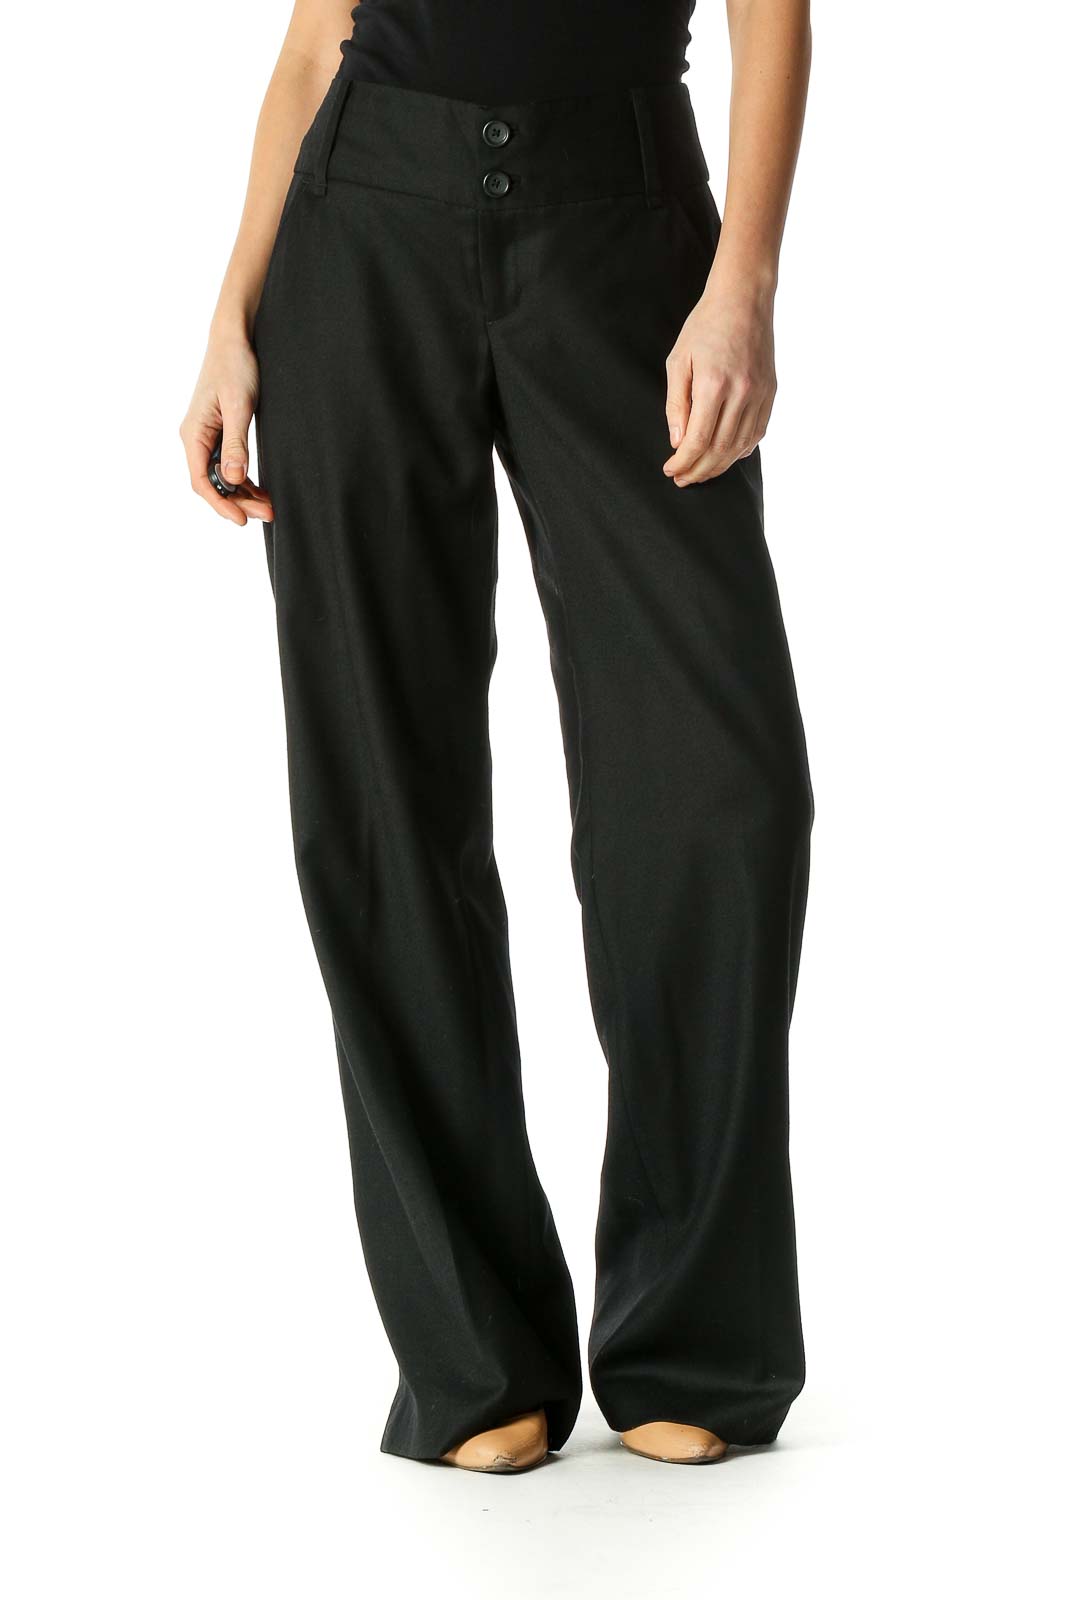 Banana Republic - Black Solid Casual Trousers Polyester Spandex Wool